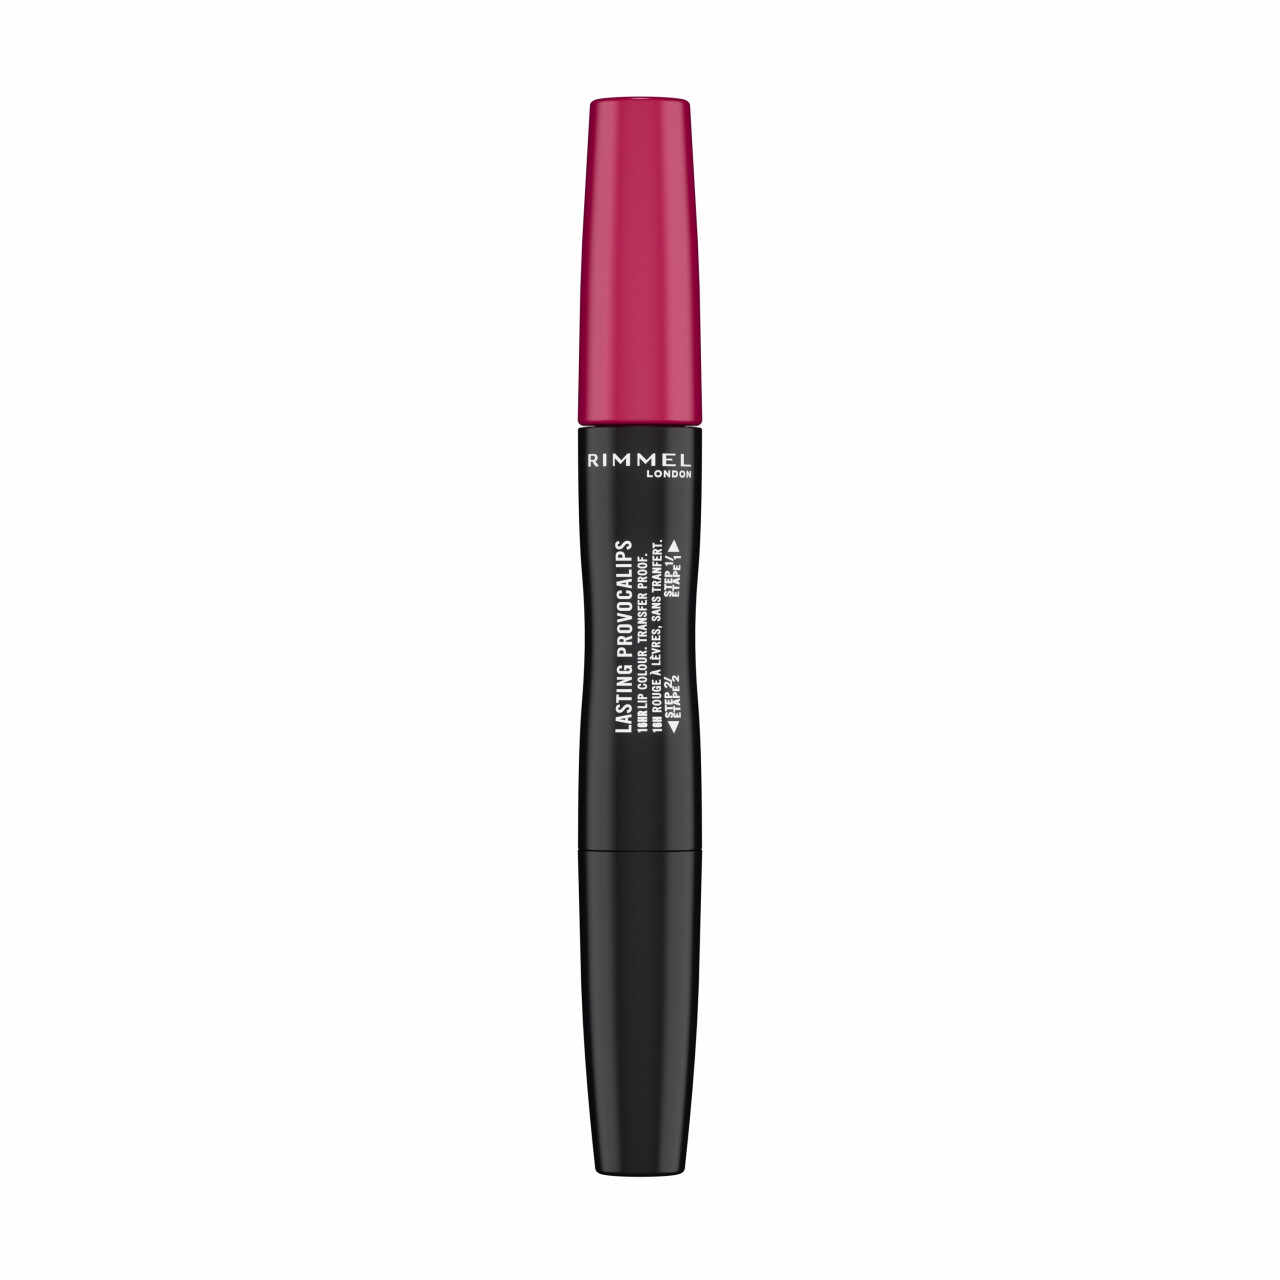 RUJ CU PERSISTENTA INDELUNGATA LASTING PROVOCALIPS DOUBLE ENDED RIMMEL LONDON POTING PINK 310